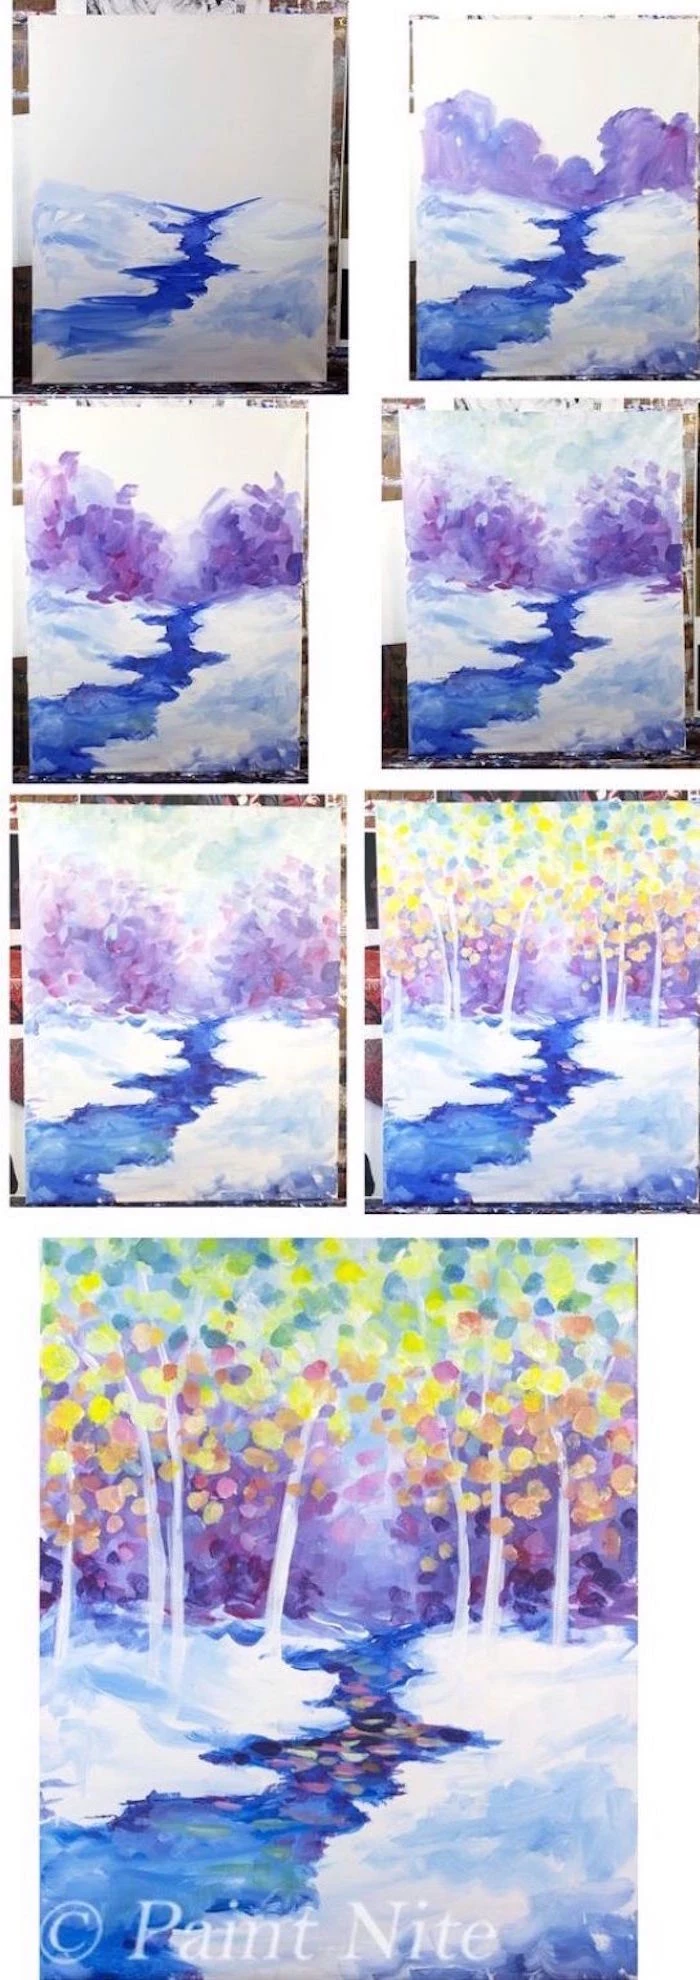 step by step diy tutorial, beginner easy painting ideas, river flowing through snowy field, tall trees in the background